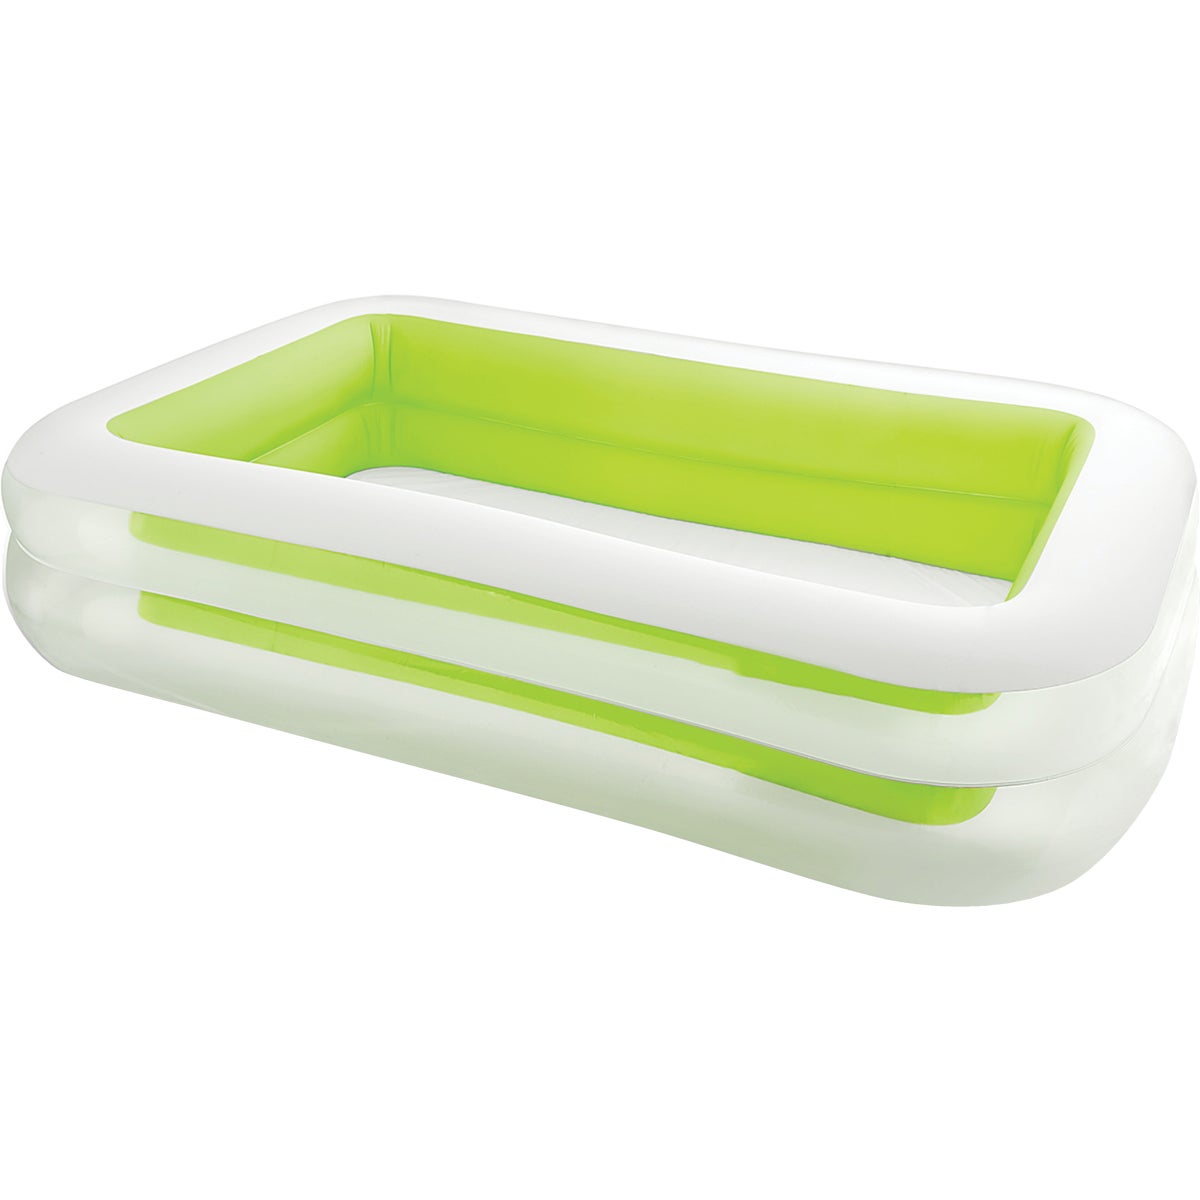 Item 843393, 103-inch x 69-inch inflatable pool, big enough for the whole family.